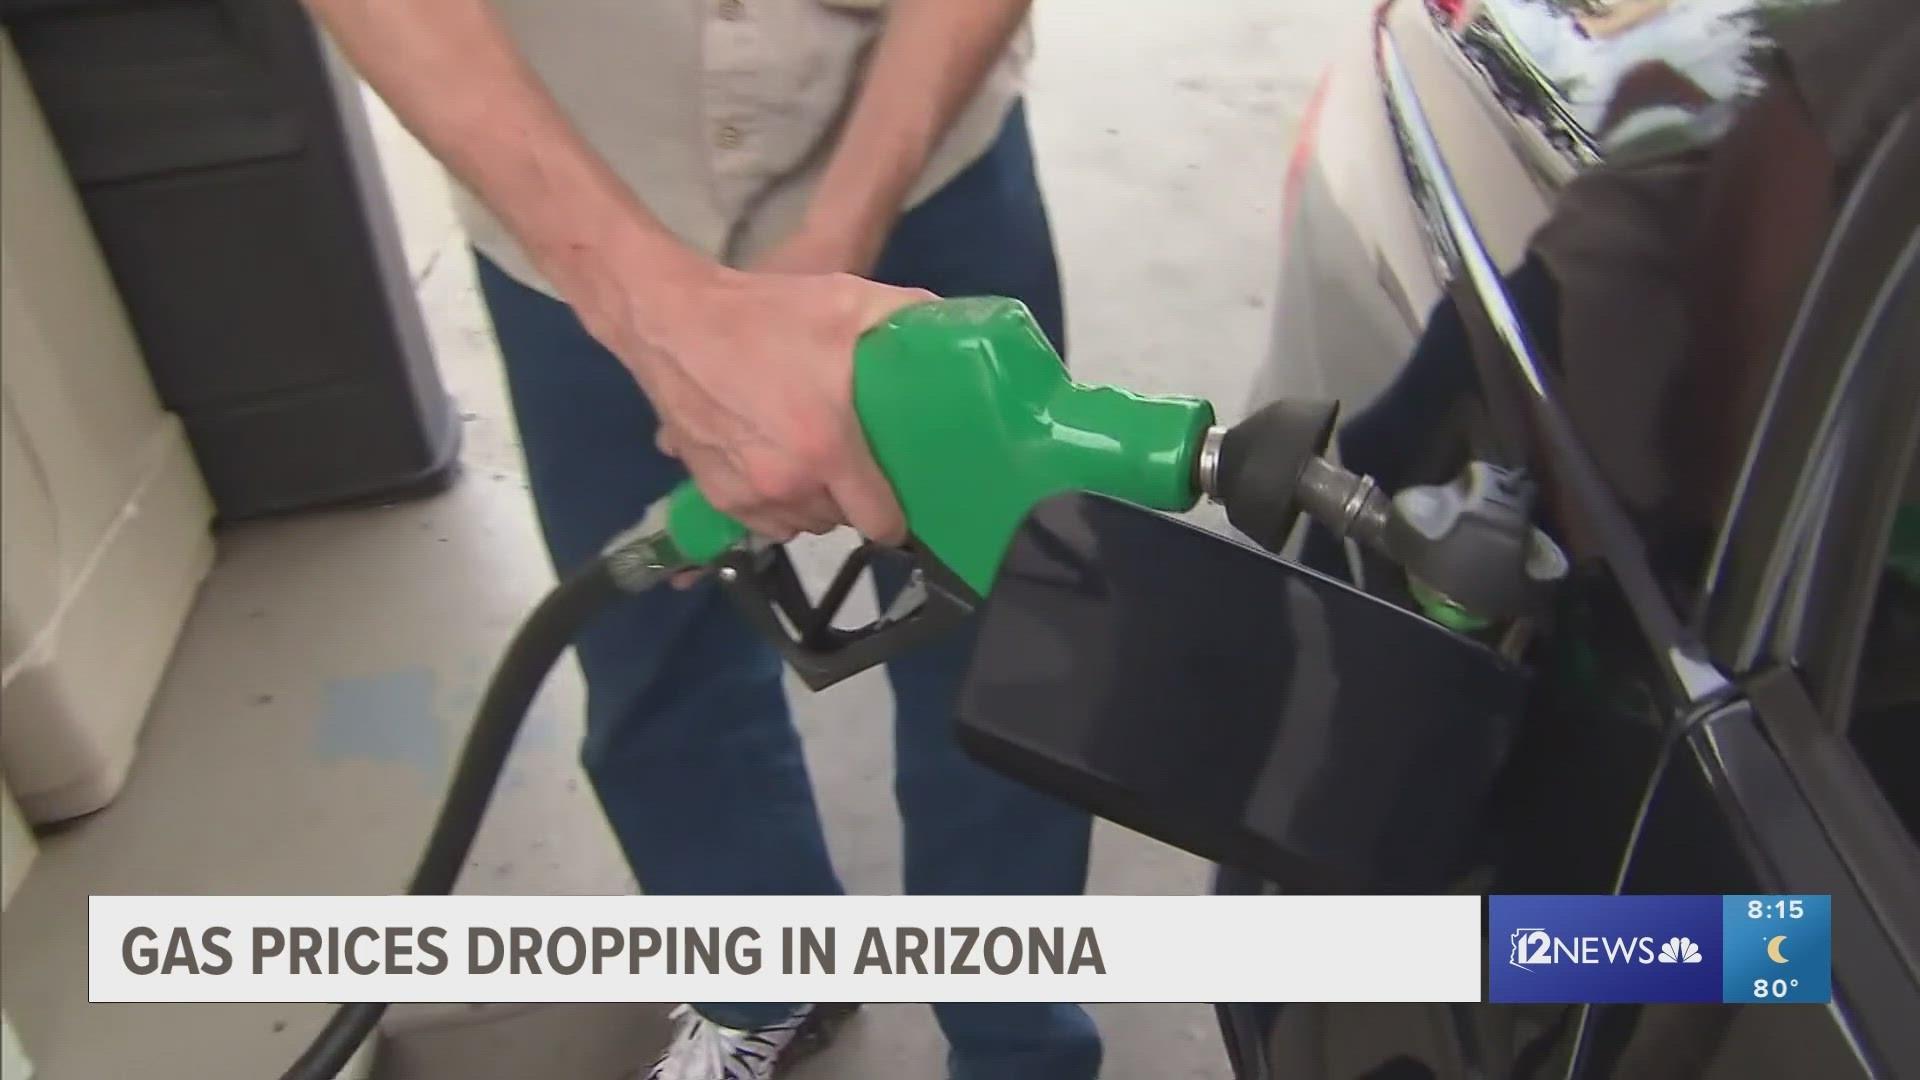 Gas prices in Arizona are nearly 50 cents cheaper this month compared to last month.